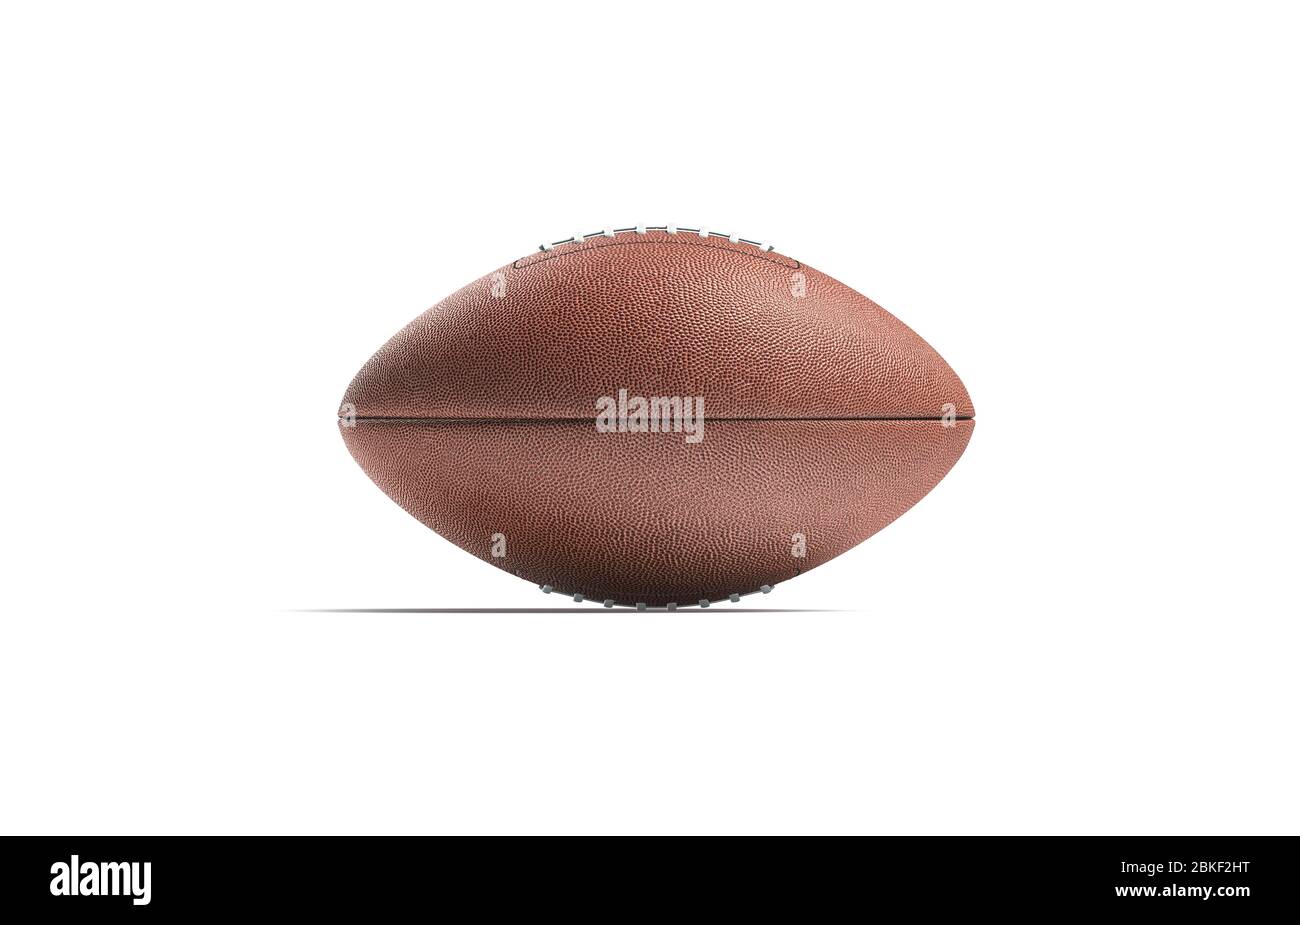 Blank brown american soccer ball mock up, side view Stock Photo